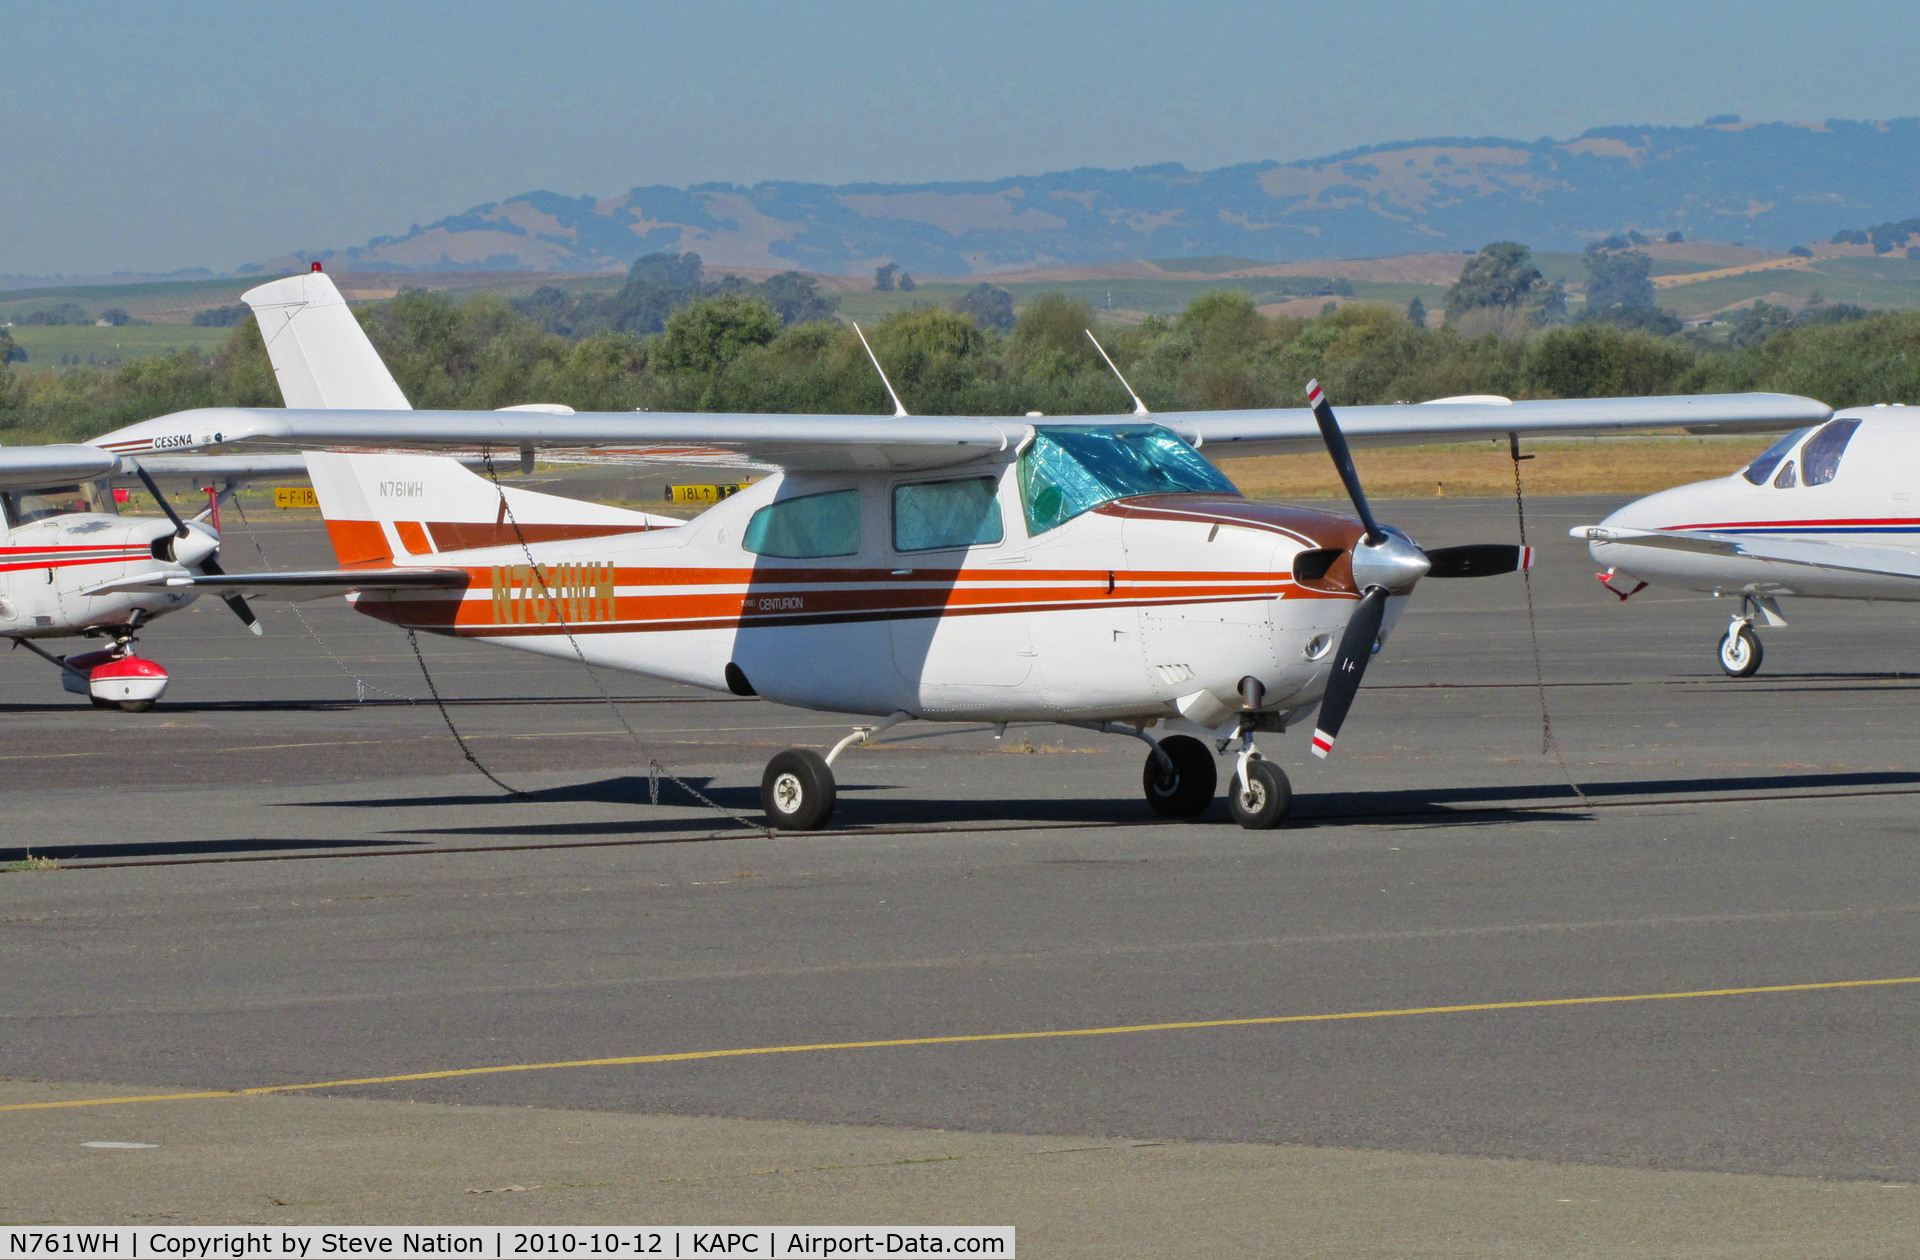 N761WH, 1978 Cessna T210M Turbo Centurion C/N 21062573, TriWings Inc. (Reno, NV) 1978 Cessna T210M visiting @ Napa County Airport, CA (still with two different sized registrations but sans cockpit cover in this shot)